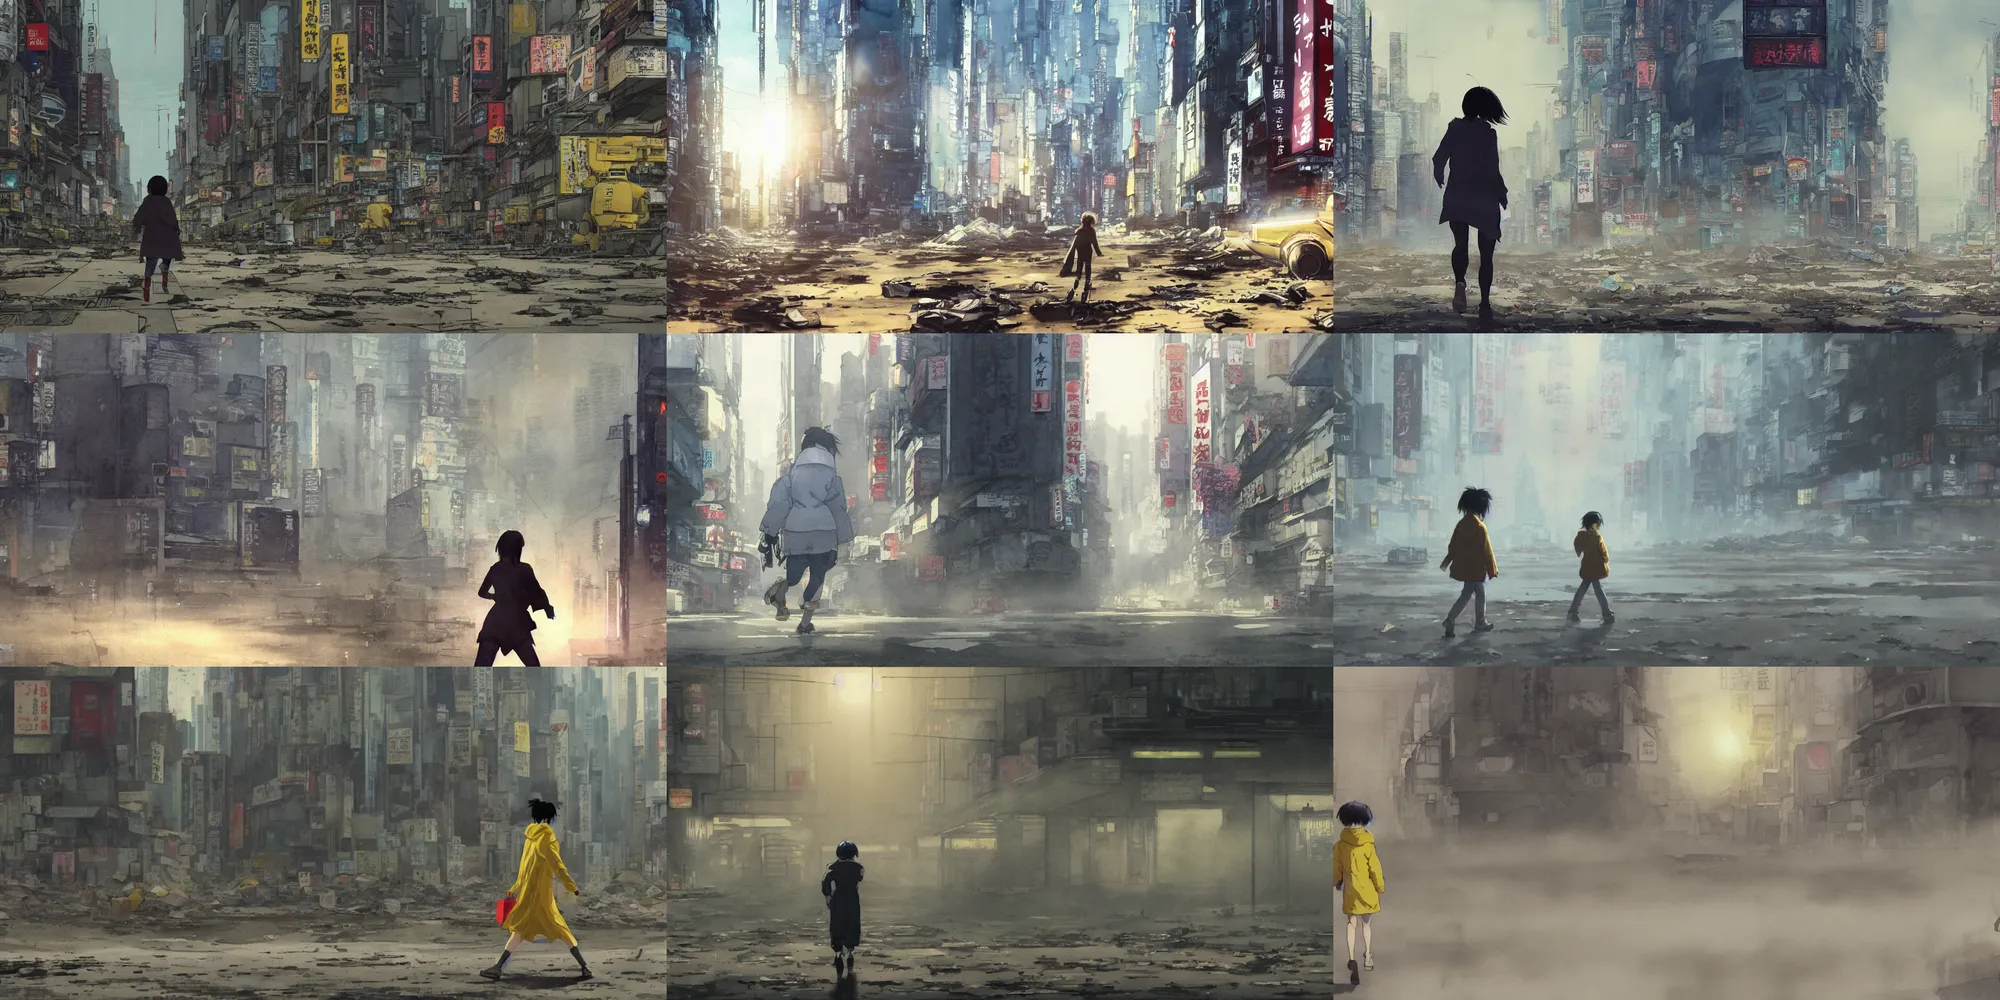 Prompt: incredible wide screenshot, ultrawide, simple watercolor, paper texture, katsuhiro otomo ghost in the shell movie scene, backlit distant shot of girl in a parka running from a giant robot invasion side view ,yellow parasol in deserted dusty shinjuku junk town, broken vending machines, old pawn shop, bright sun bleached ground, mud, fog, dust, windy, scary chameleon face muscle robot monster lurks in the background, ghost mask, teeth, animatronic, black smoke, pale beige sky, junk tv, texture, shell, brown mud, dust, bored expression, overhead wires, telephone pole, dusty, dry, pencil marks, genius party,shinjuku, koju morimoto, katsuya terada, masamune shirow, tatsuyuki tanaka hd, 4k, remaster, dynamic camera angle, deep 3 point perspective, fish eye, dynamic scene